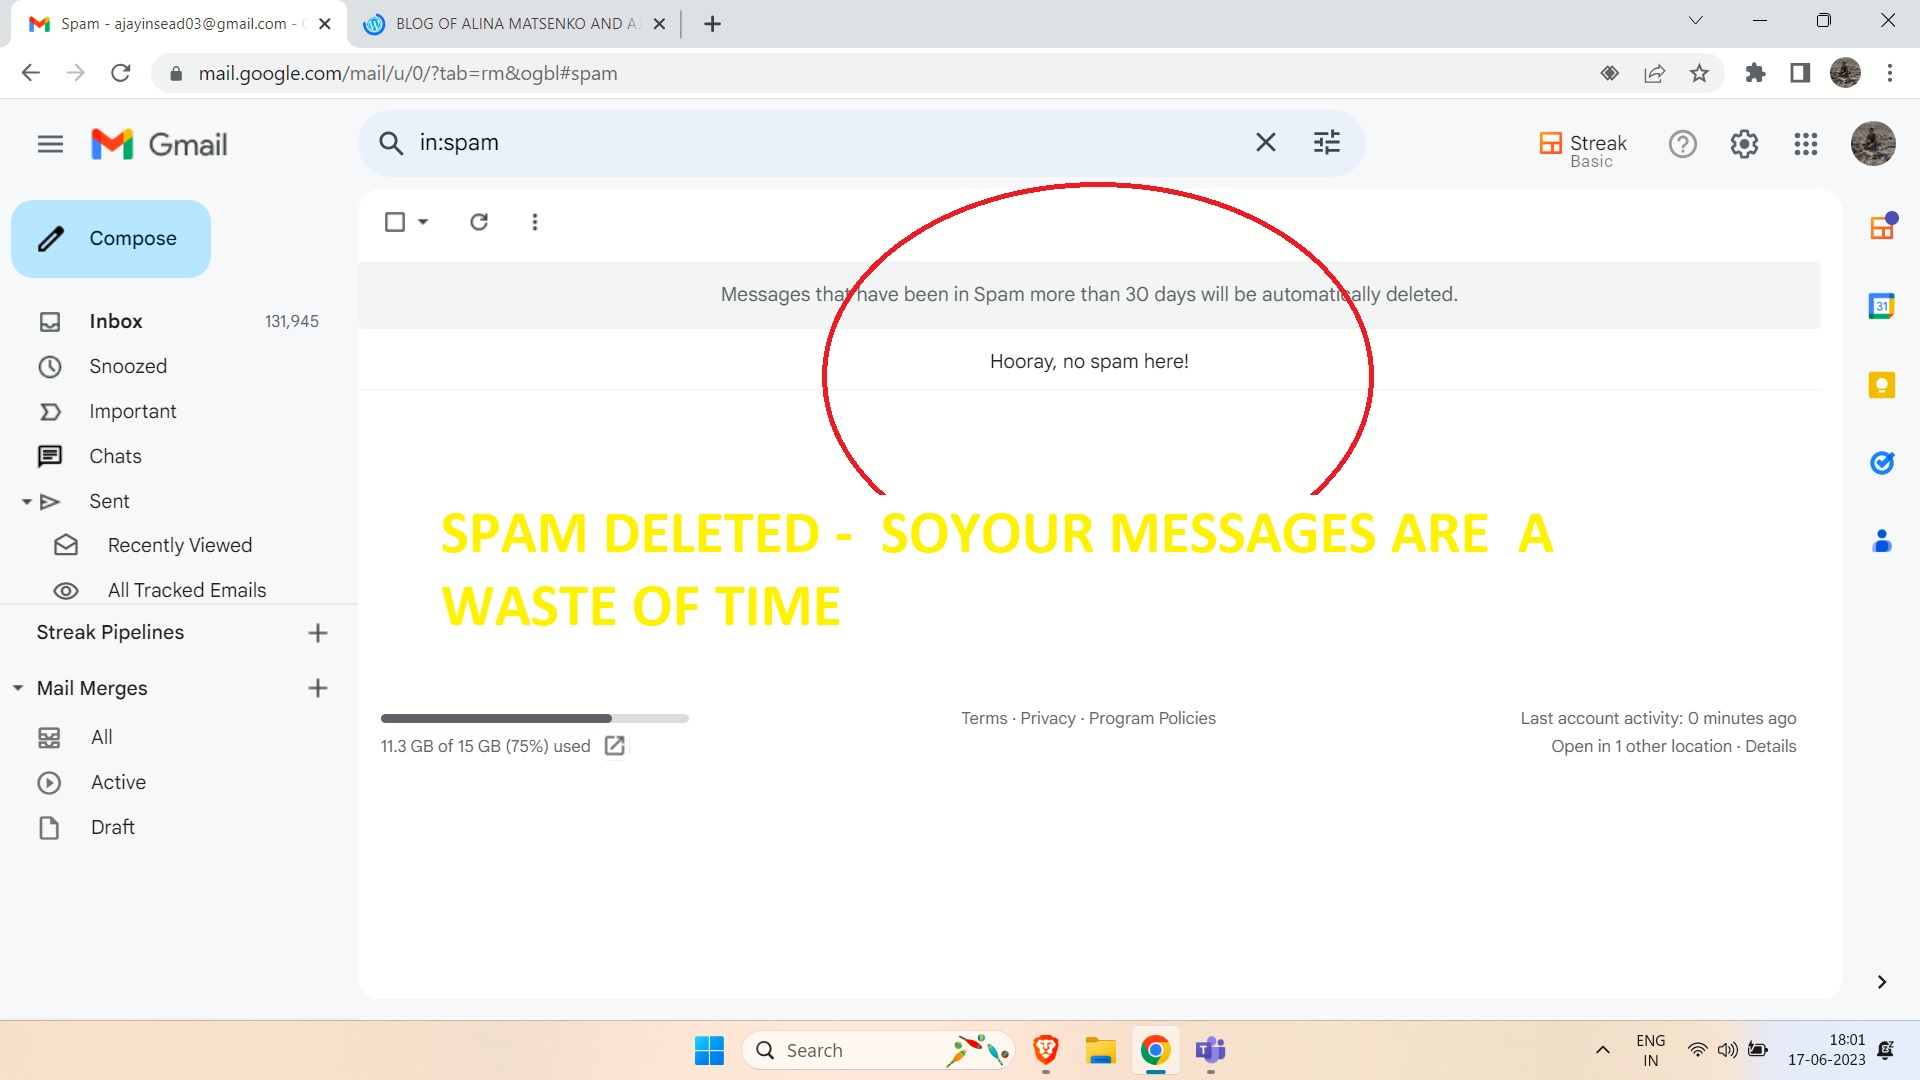 SPAM DELETED - SOYOUR MESSAGES ARE A WASTE OF TIME